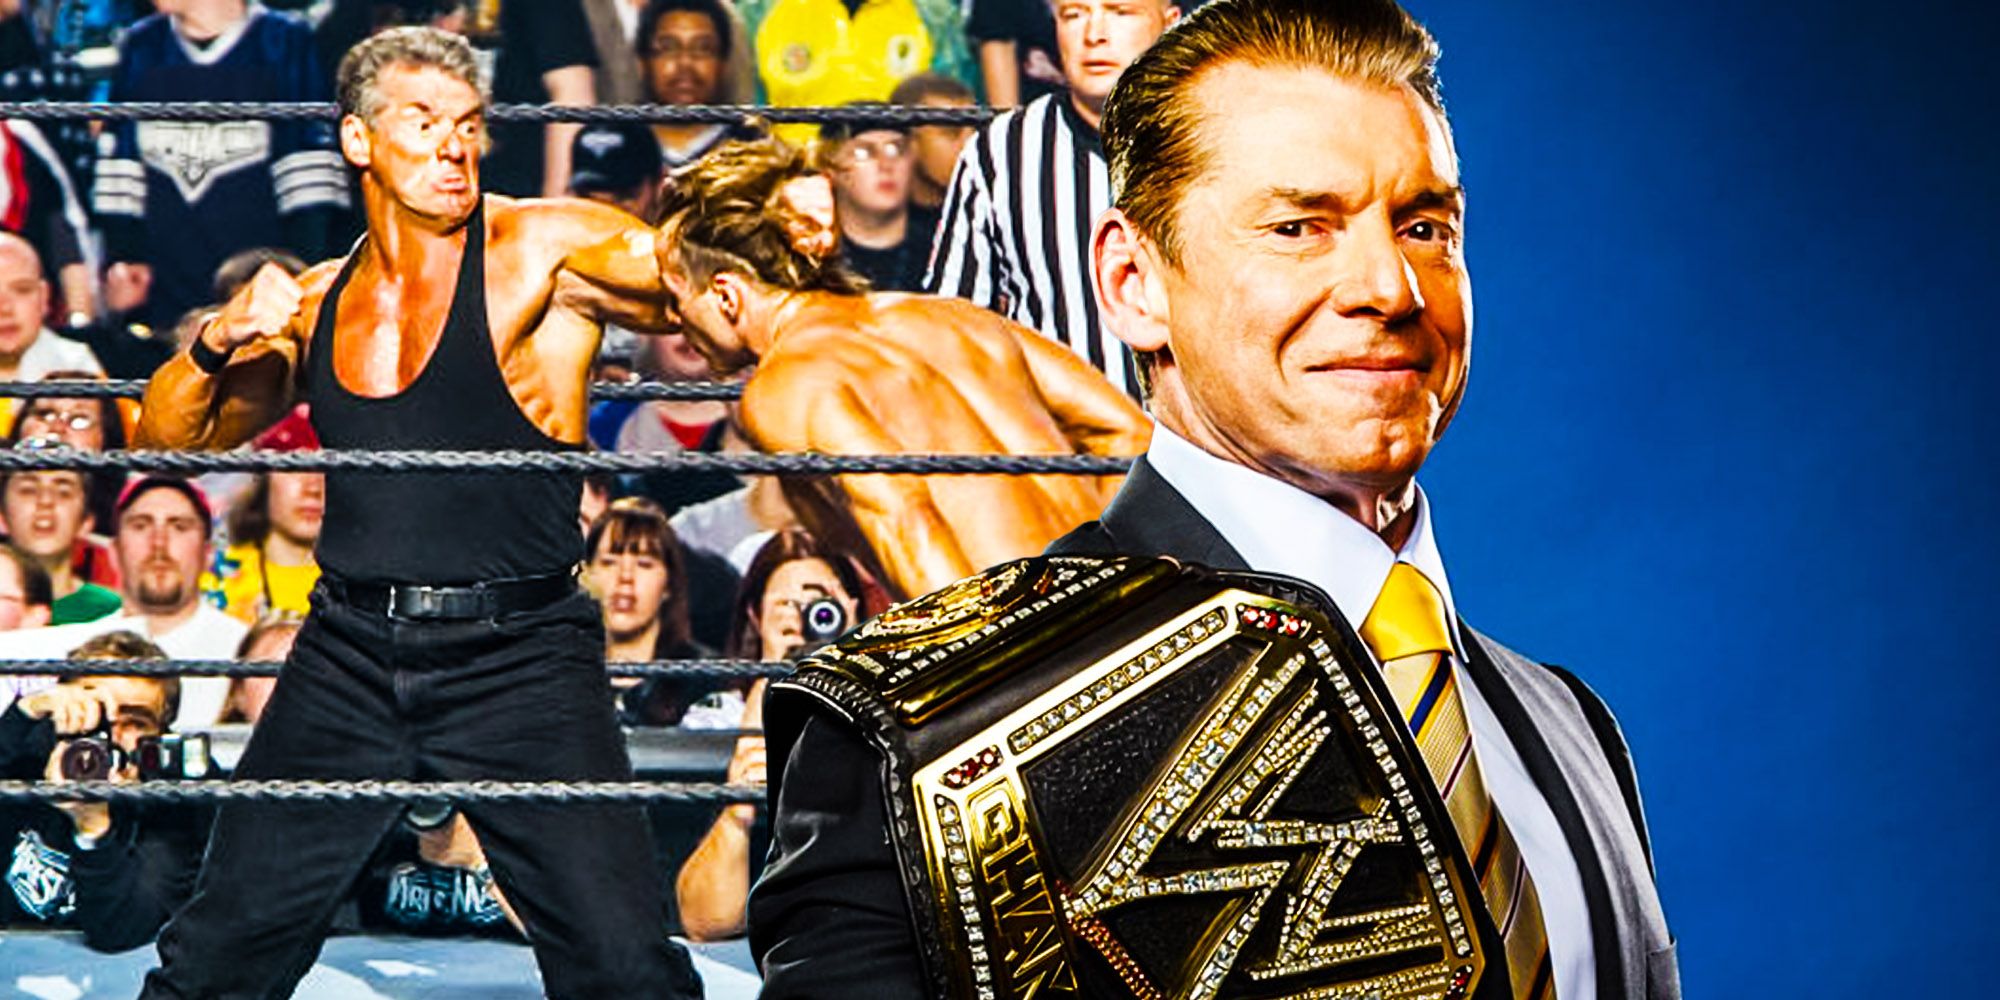 WWE: Every Vince McMahon WrestleMania Match Ranked From Worst To Best